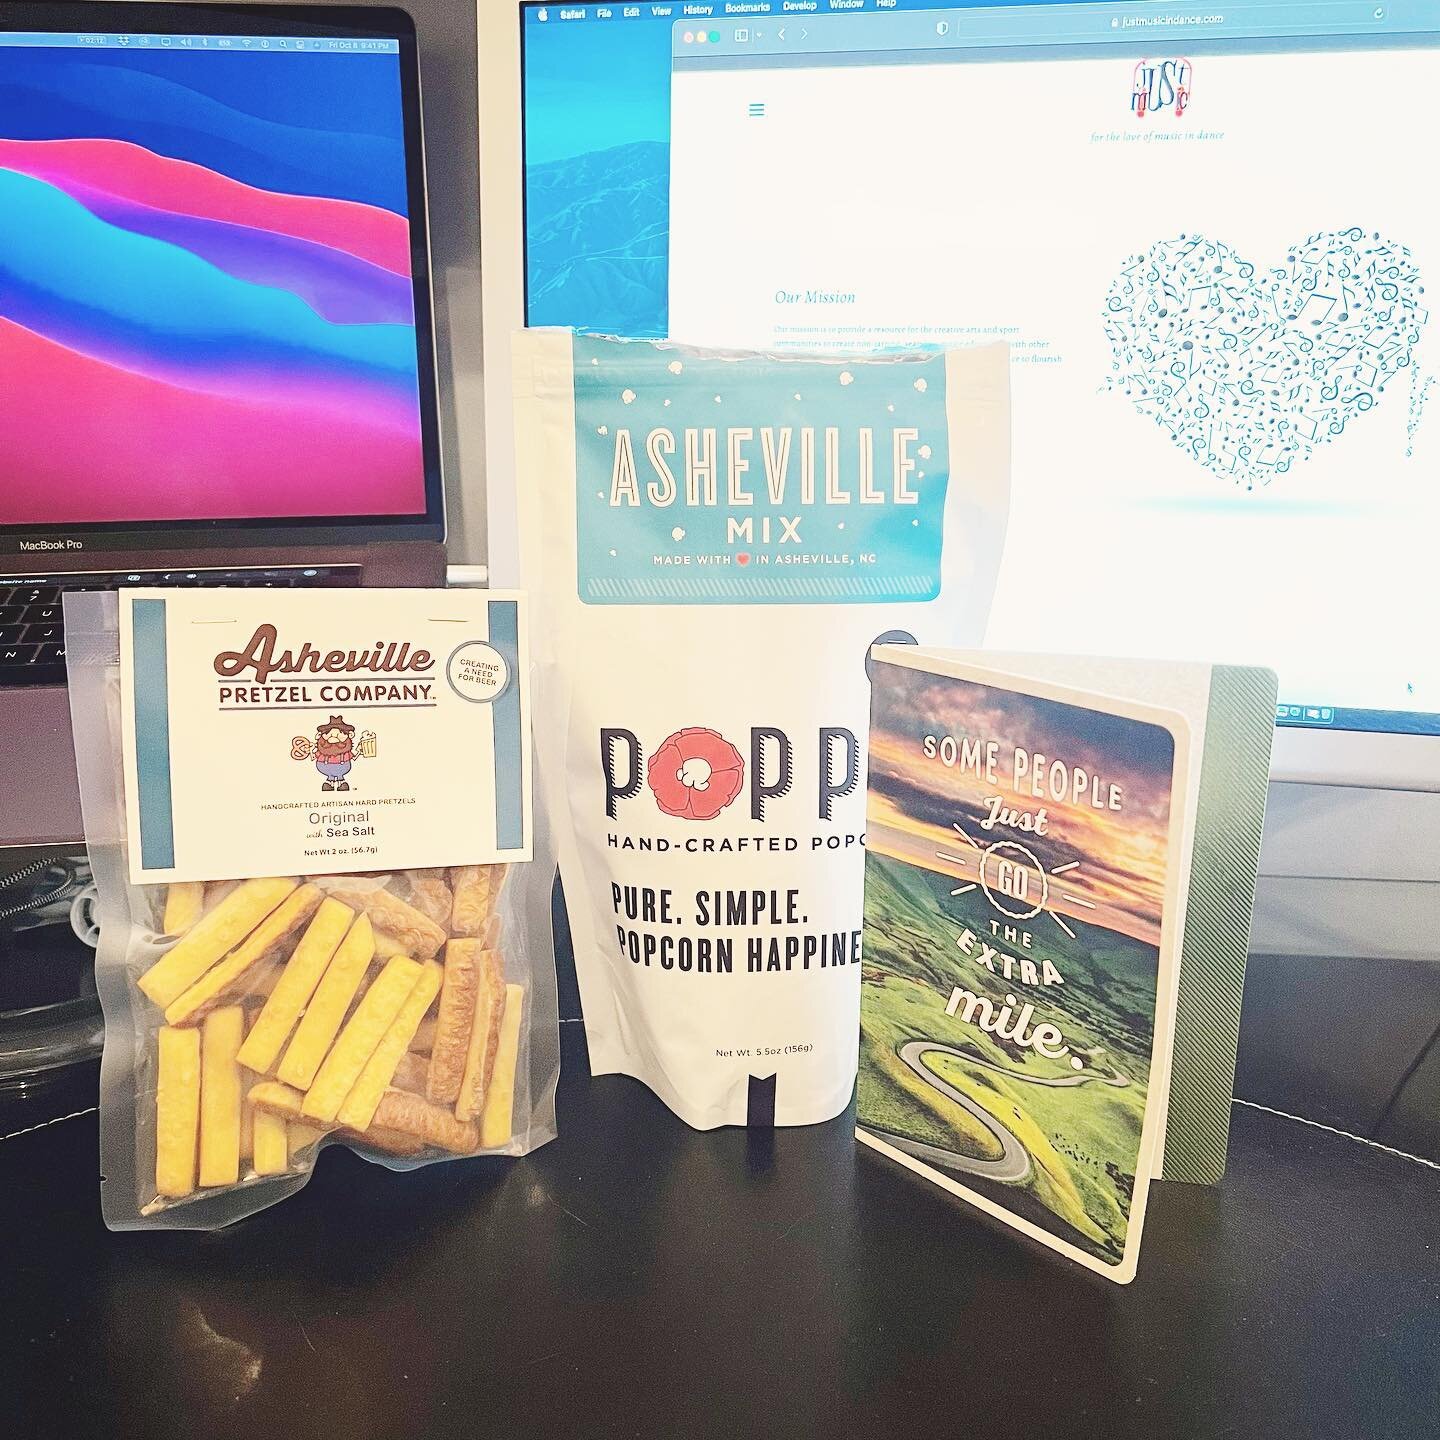 How lucky I was to receive this kind gift from a client as a thank you.
🤩🍿😍🥨🤩
Thank YOU, Michele at @centerstageavl for these delicious treats from your city!